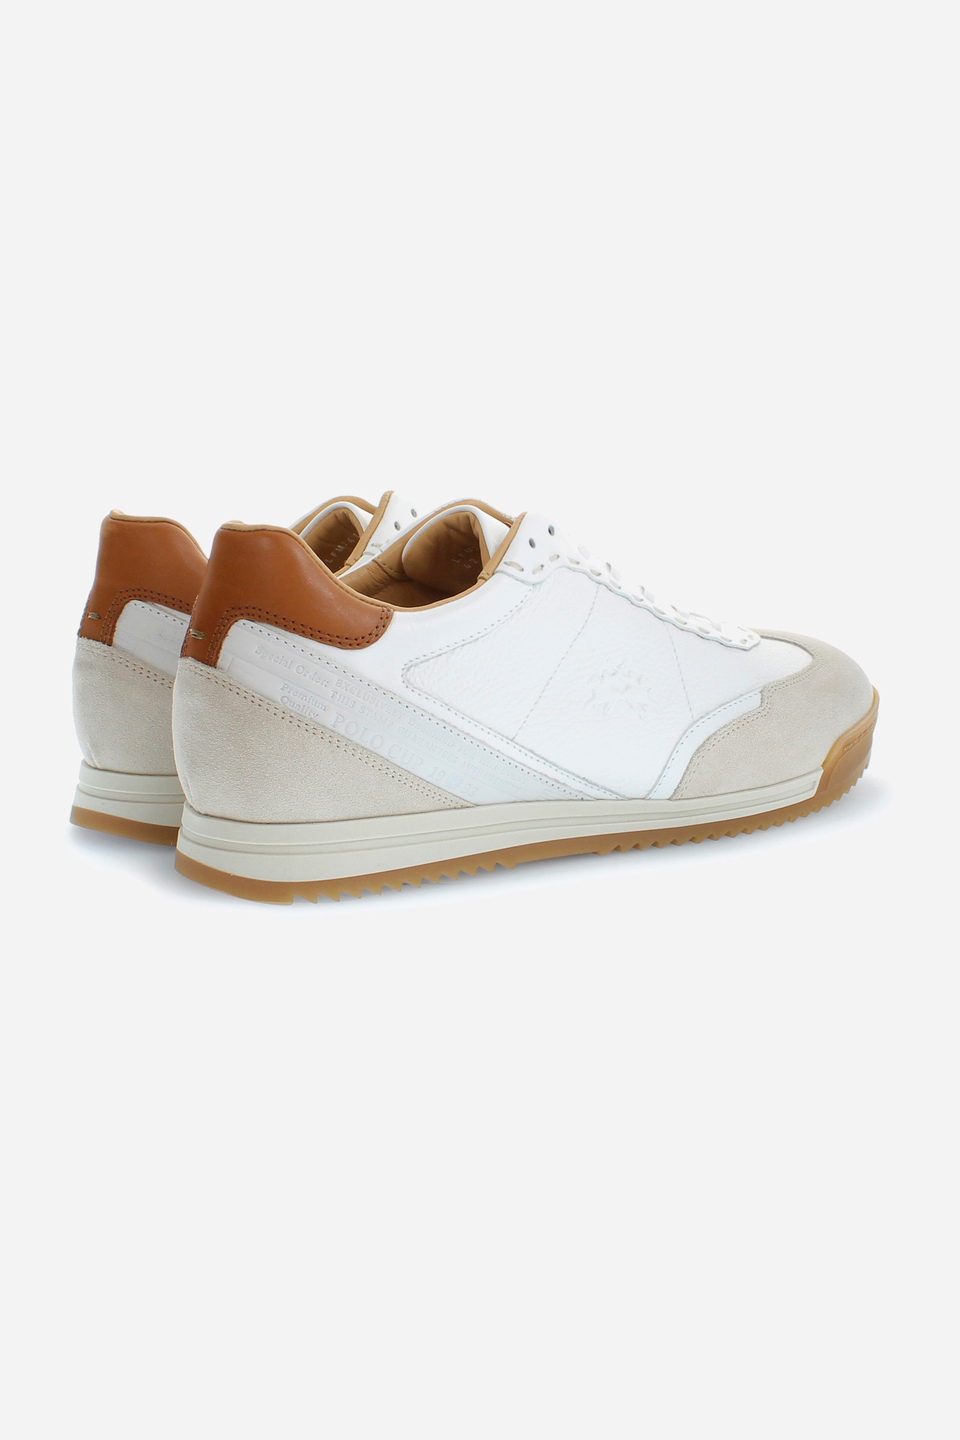 Classic men's trainers in leather | La Martina - Official Online Shop